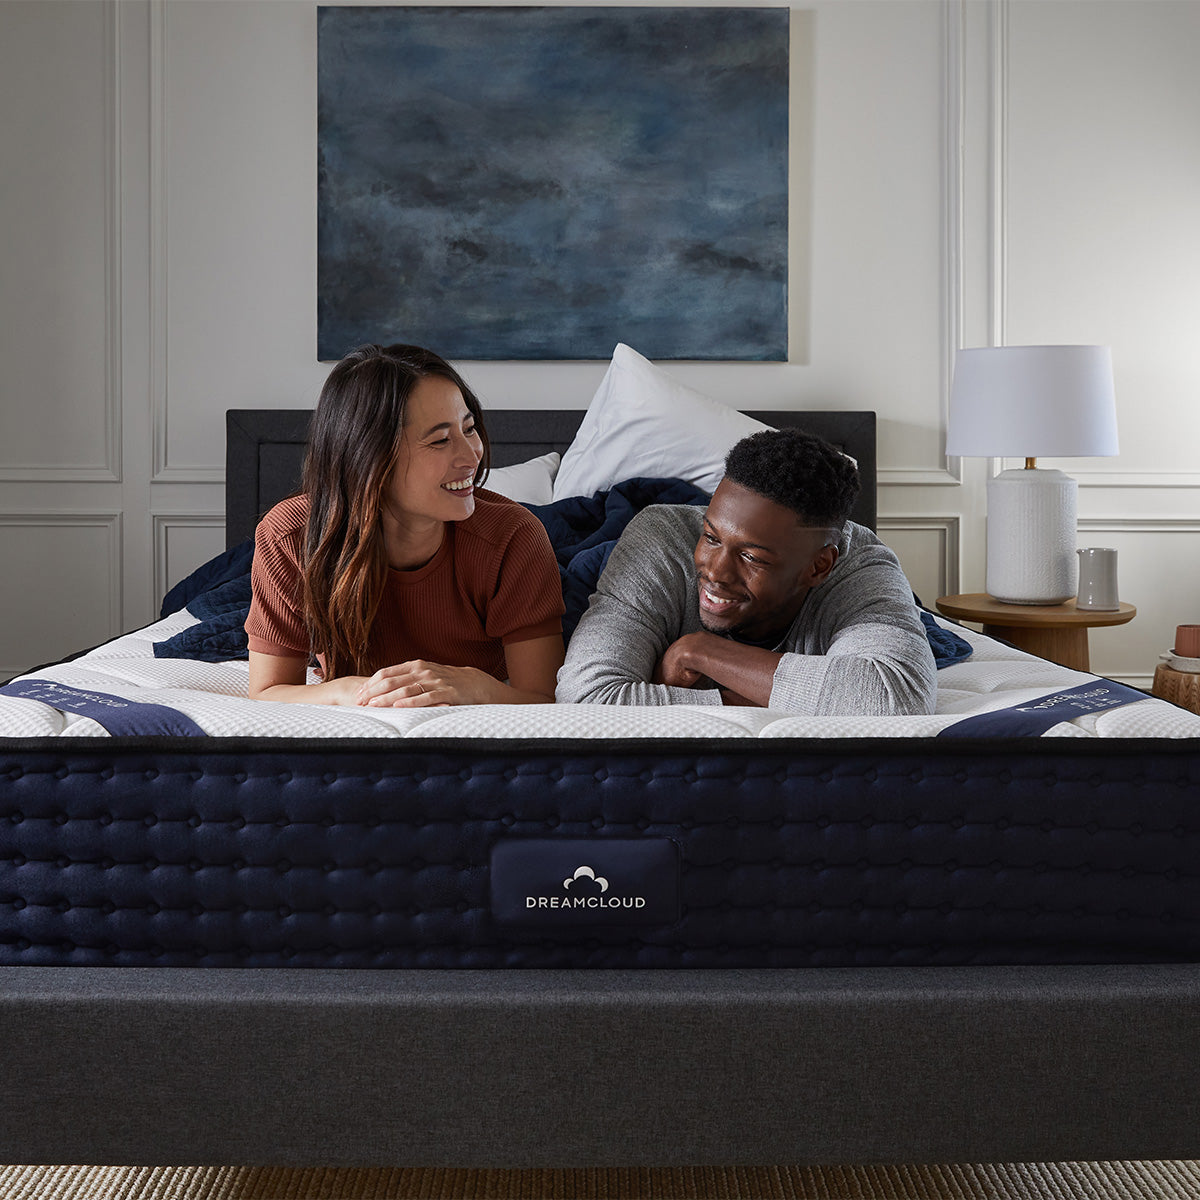 Couple Relaxing On The DreamCloud Hybrid Mattress